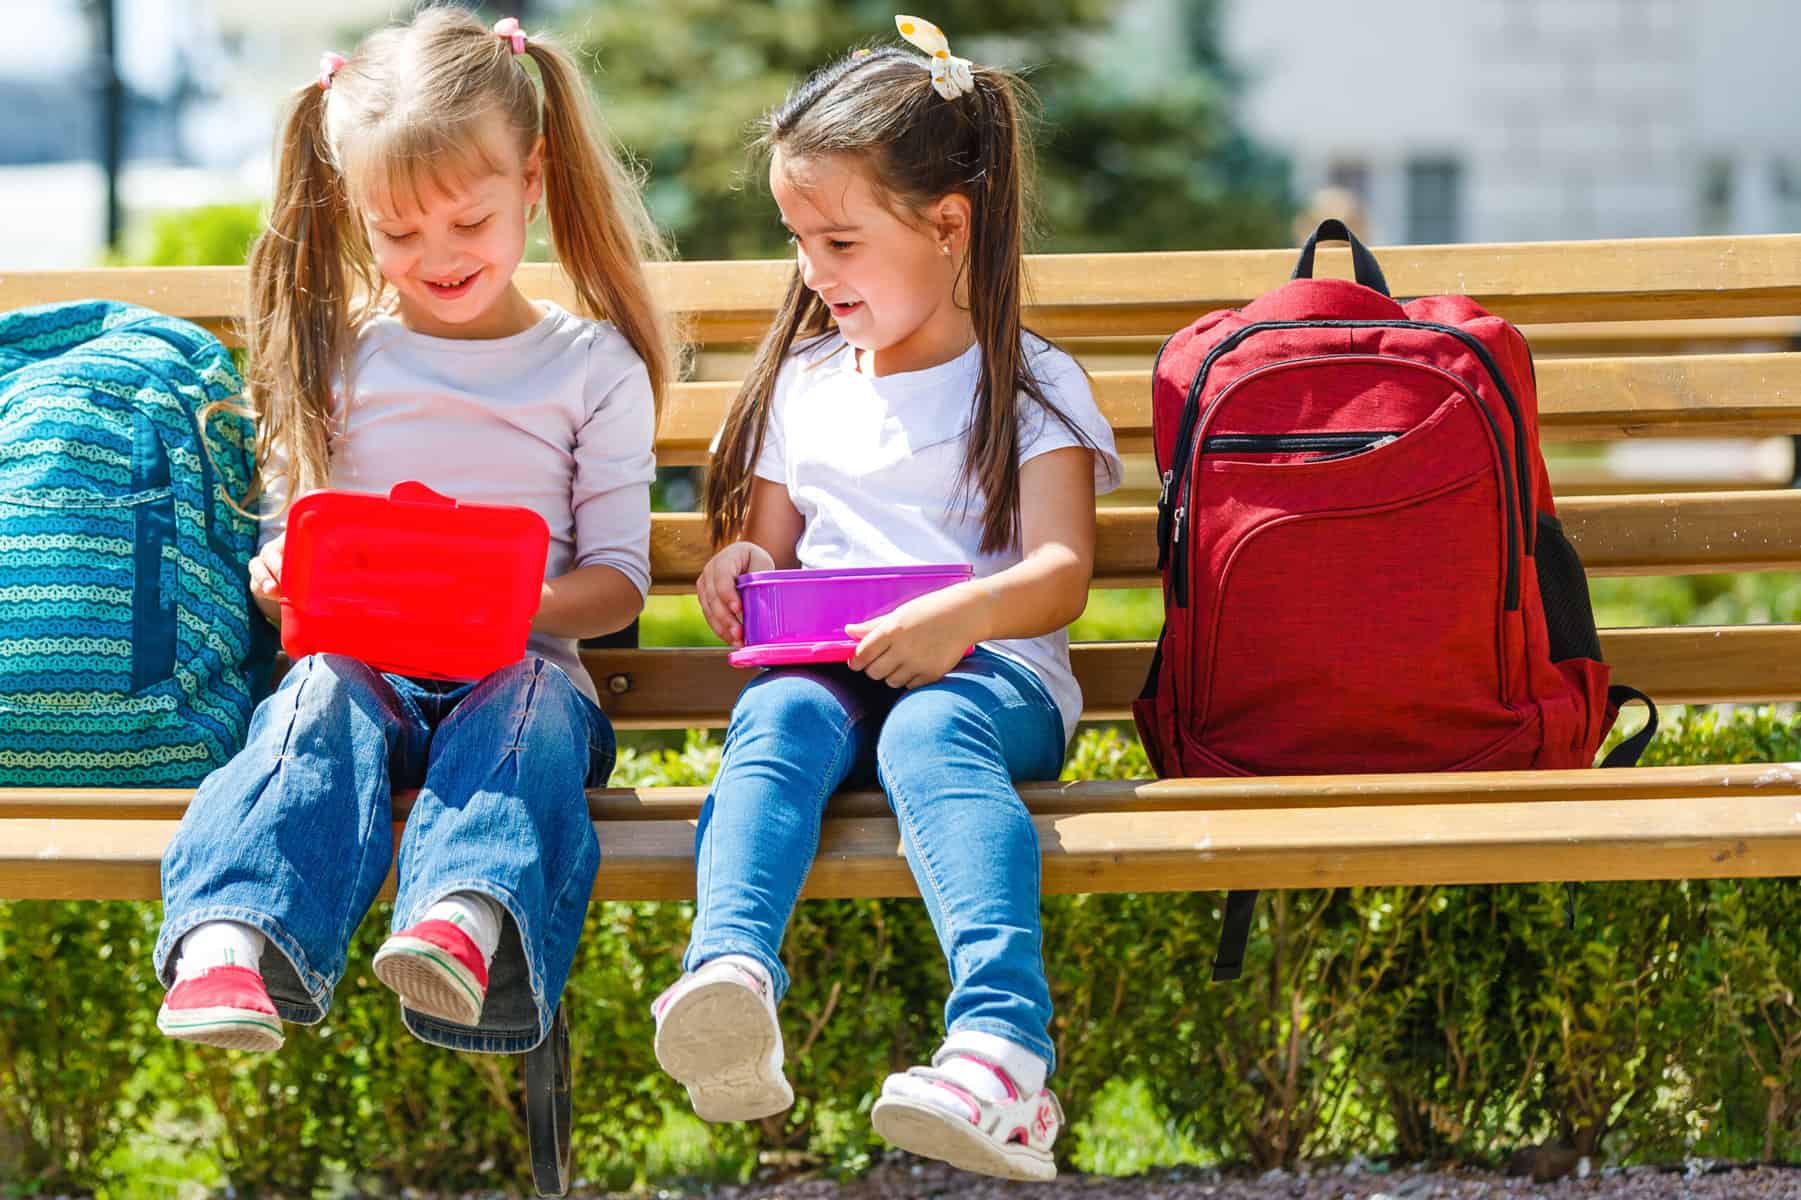 Two young girls sitting on a park bench with their lunch boxes.